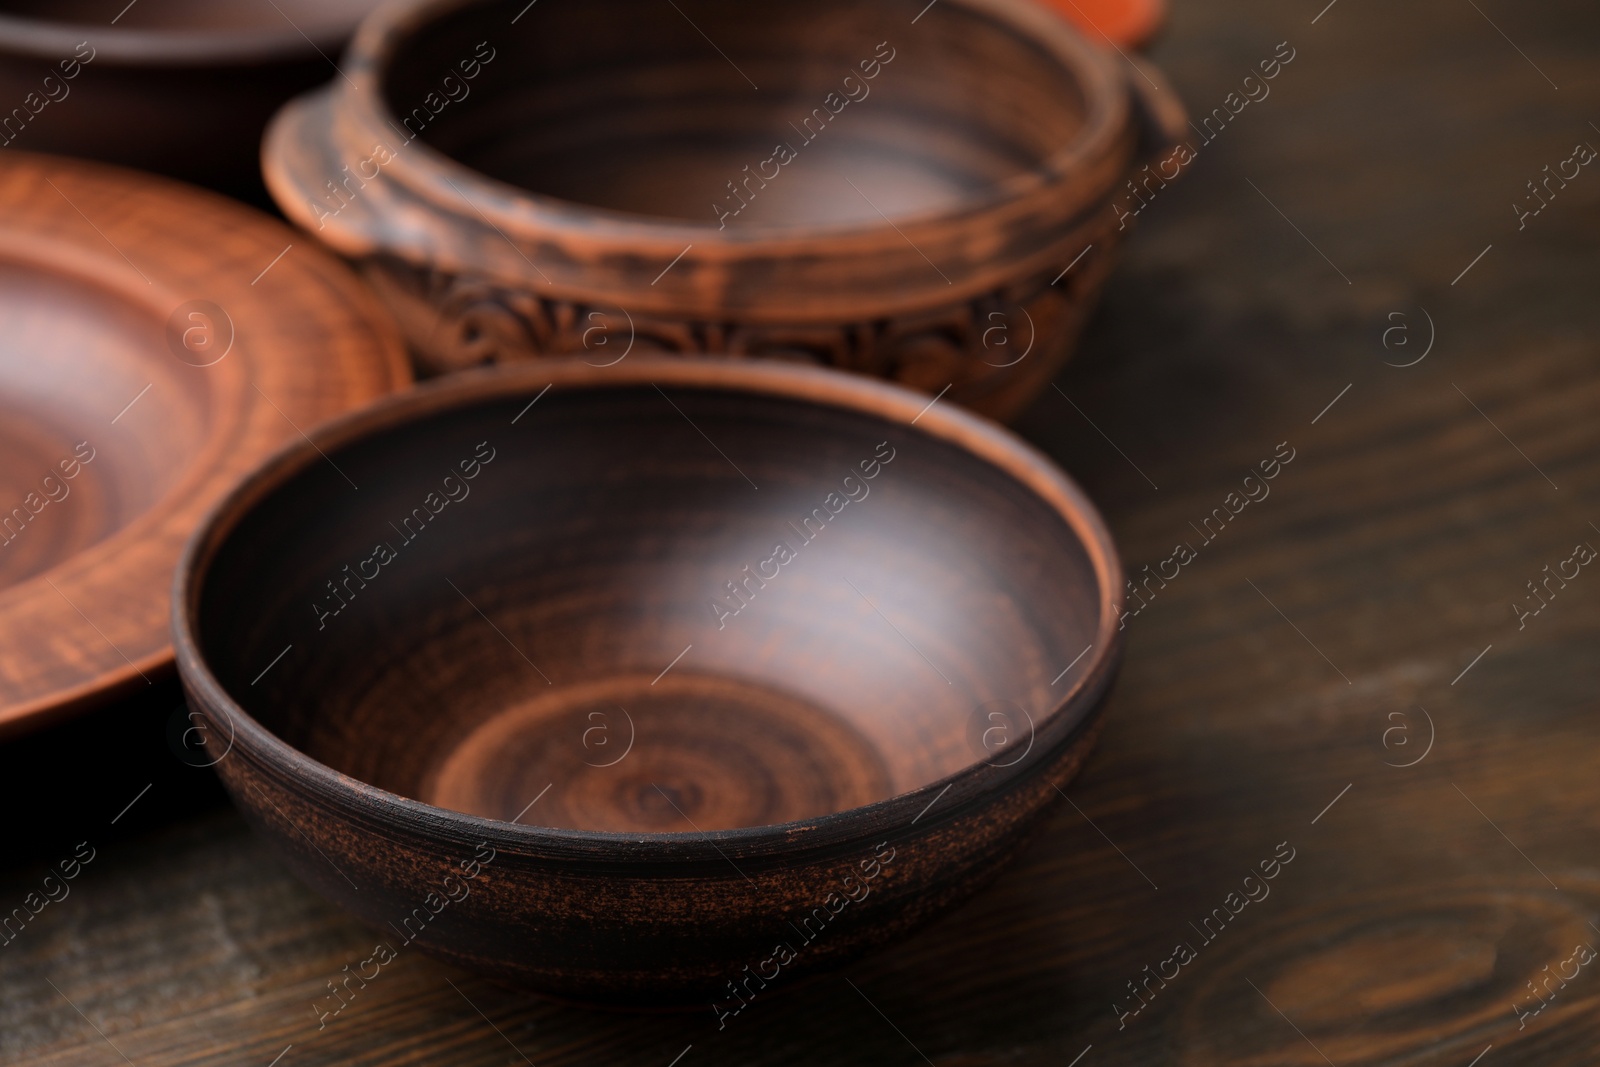 Photo of Set of clay dishes on wooden table, closeup. Cooking utensils